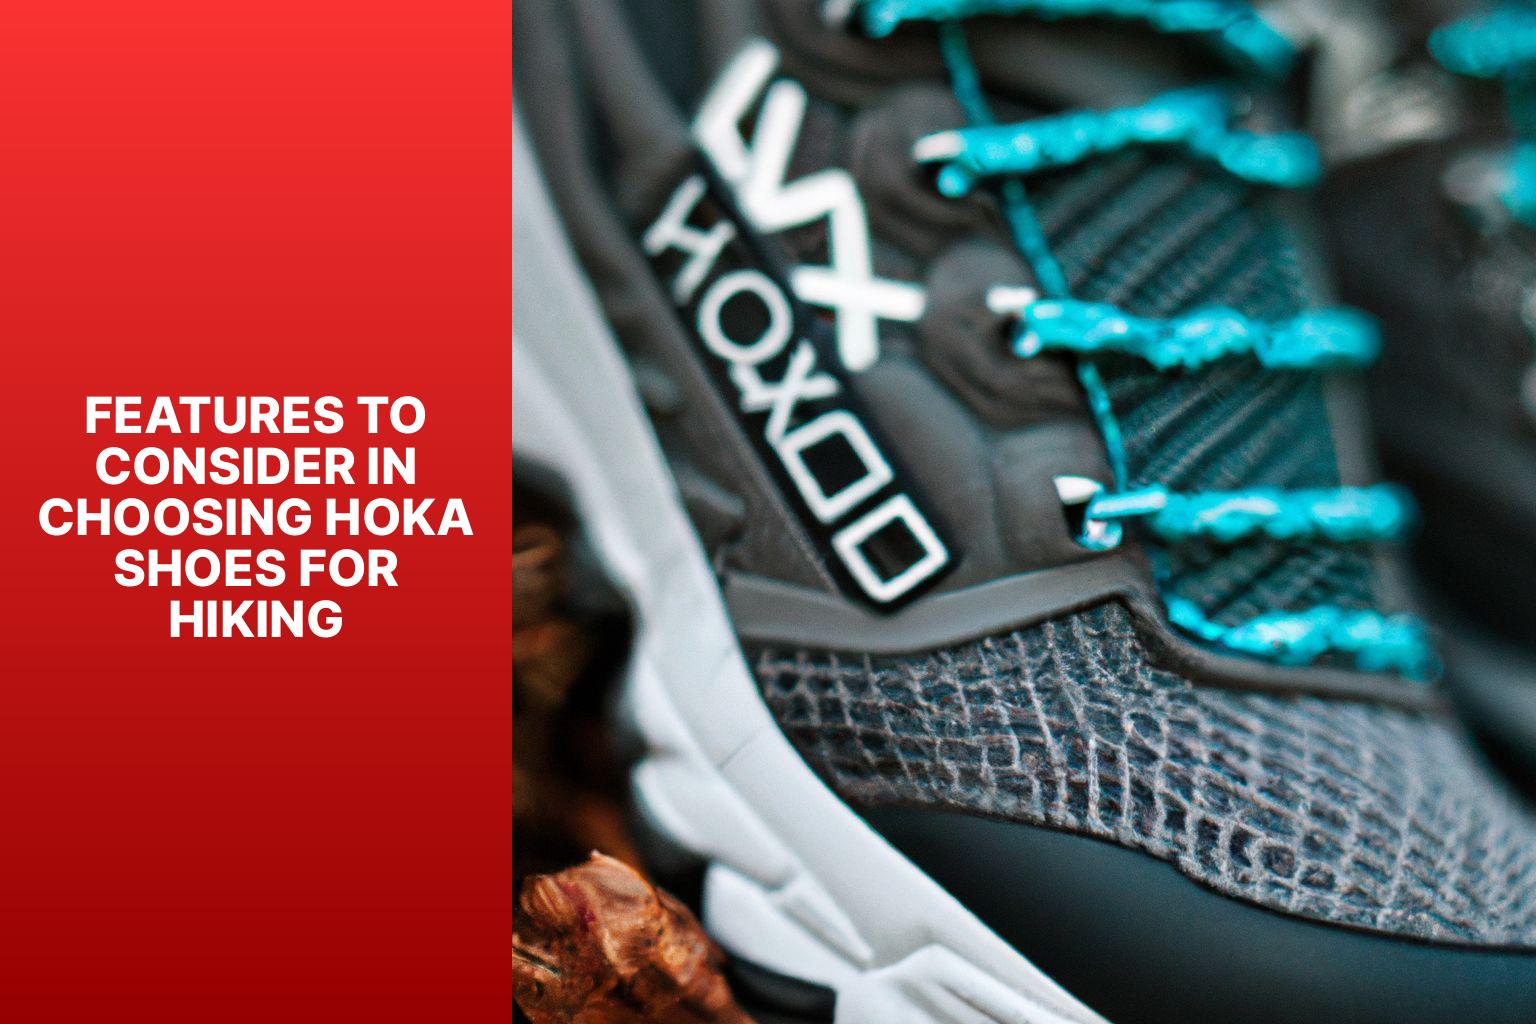 Features to Consider in Choosing Hoka Shoes for Hiking - Which Hoka Shoe is Best for Hiking 